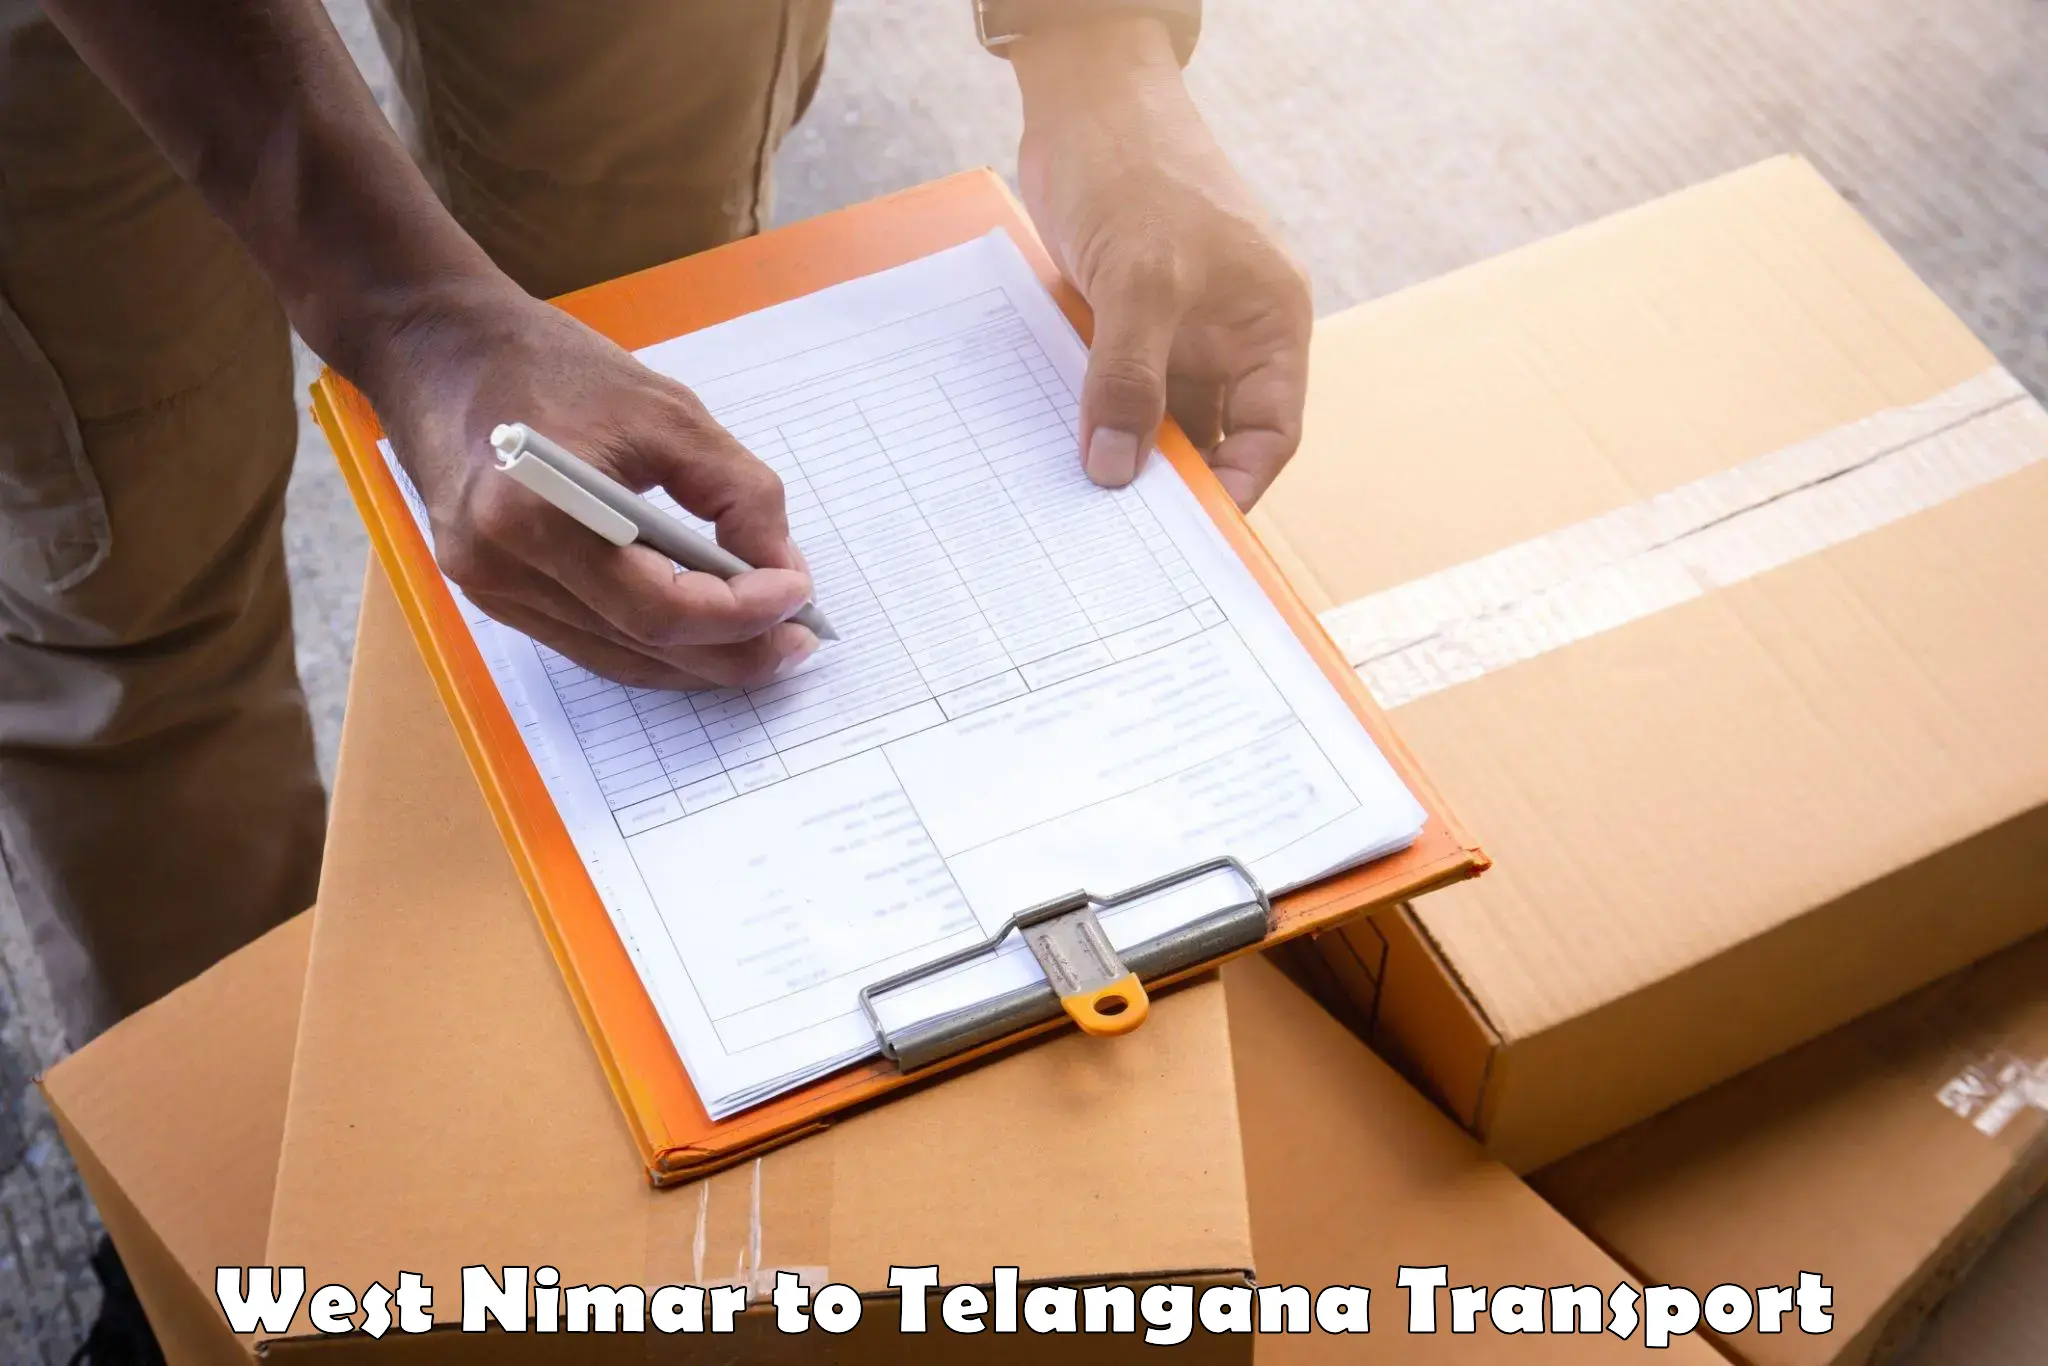 Container transport service West Nimar to Kollapur